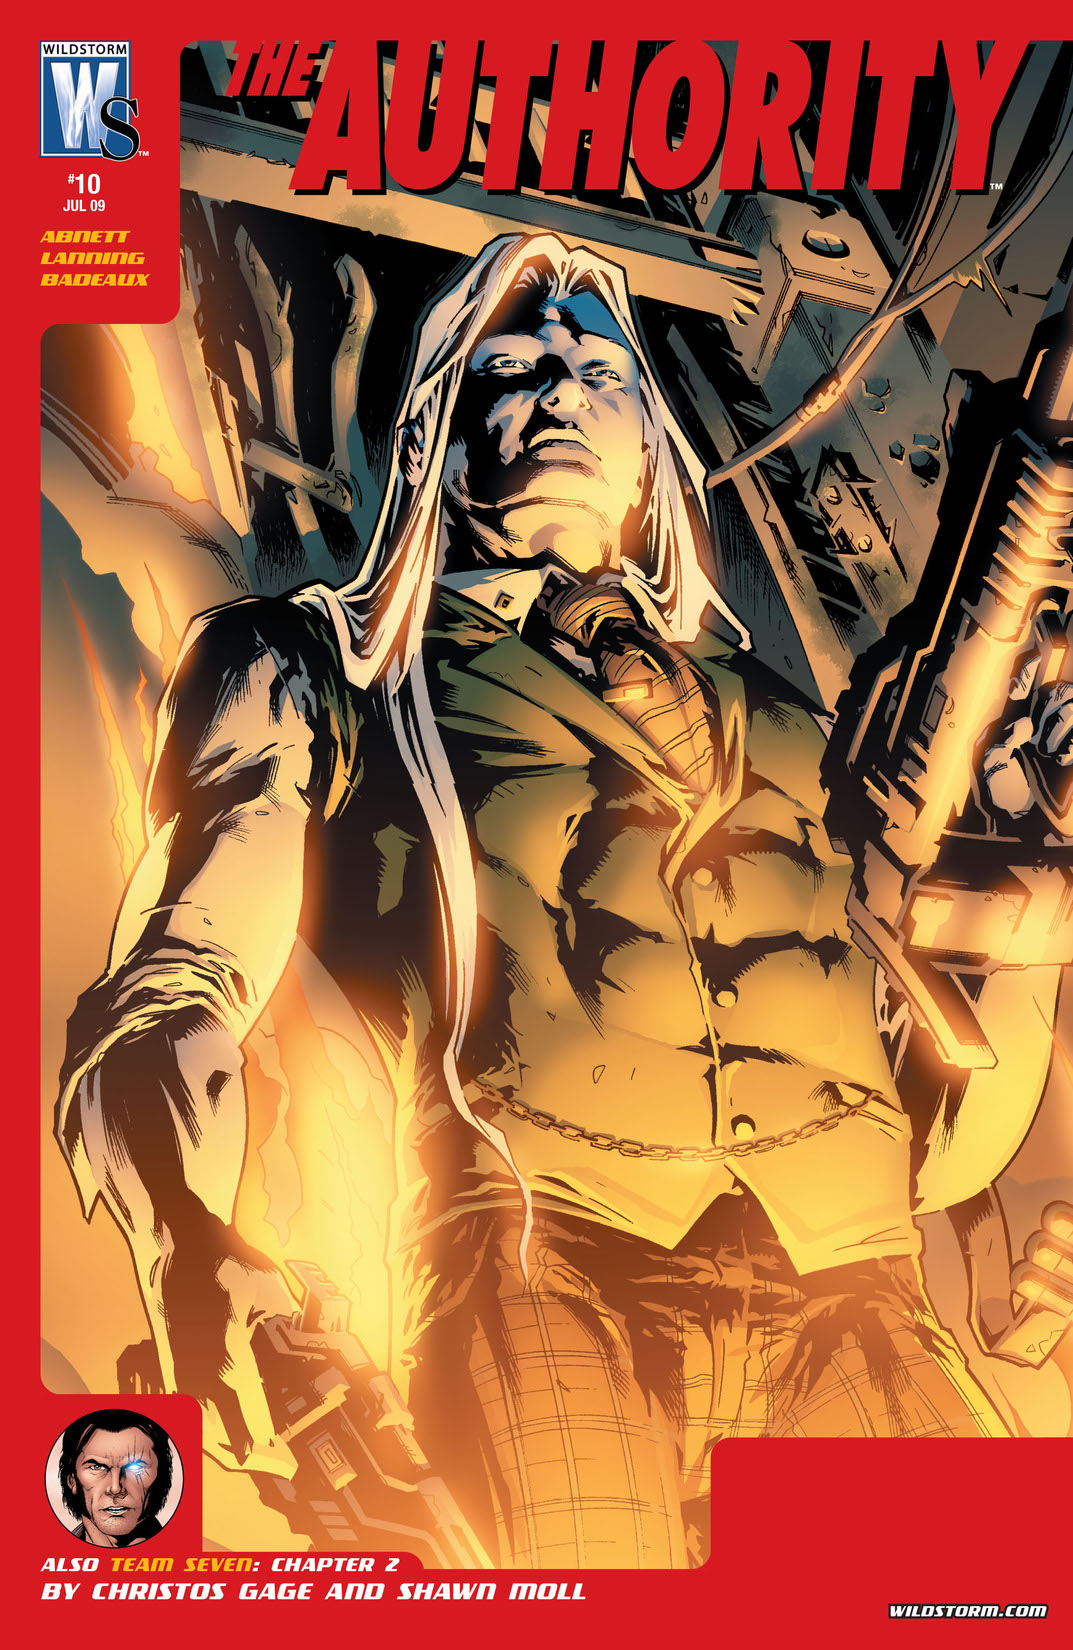 Authority (2008-) #10 preview images